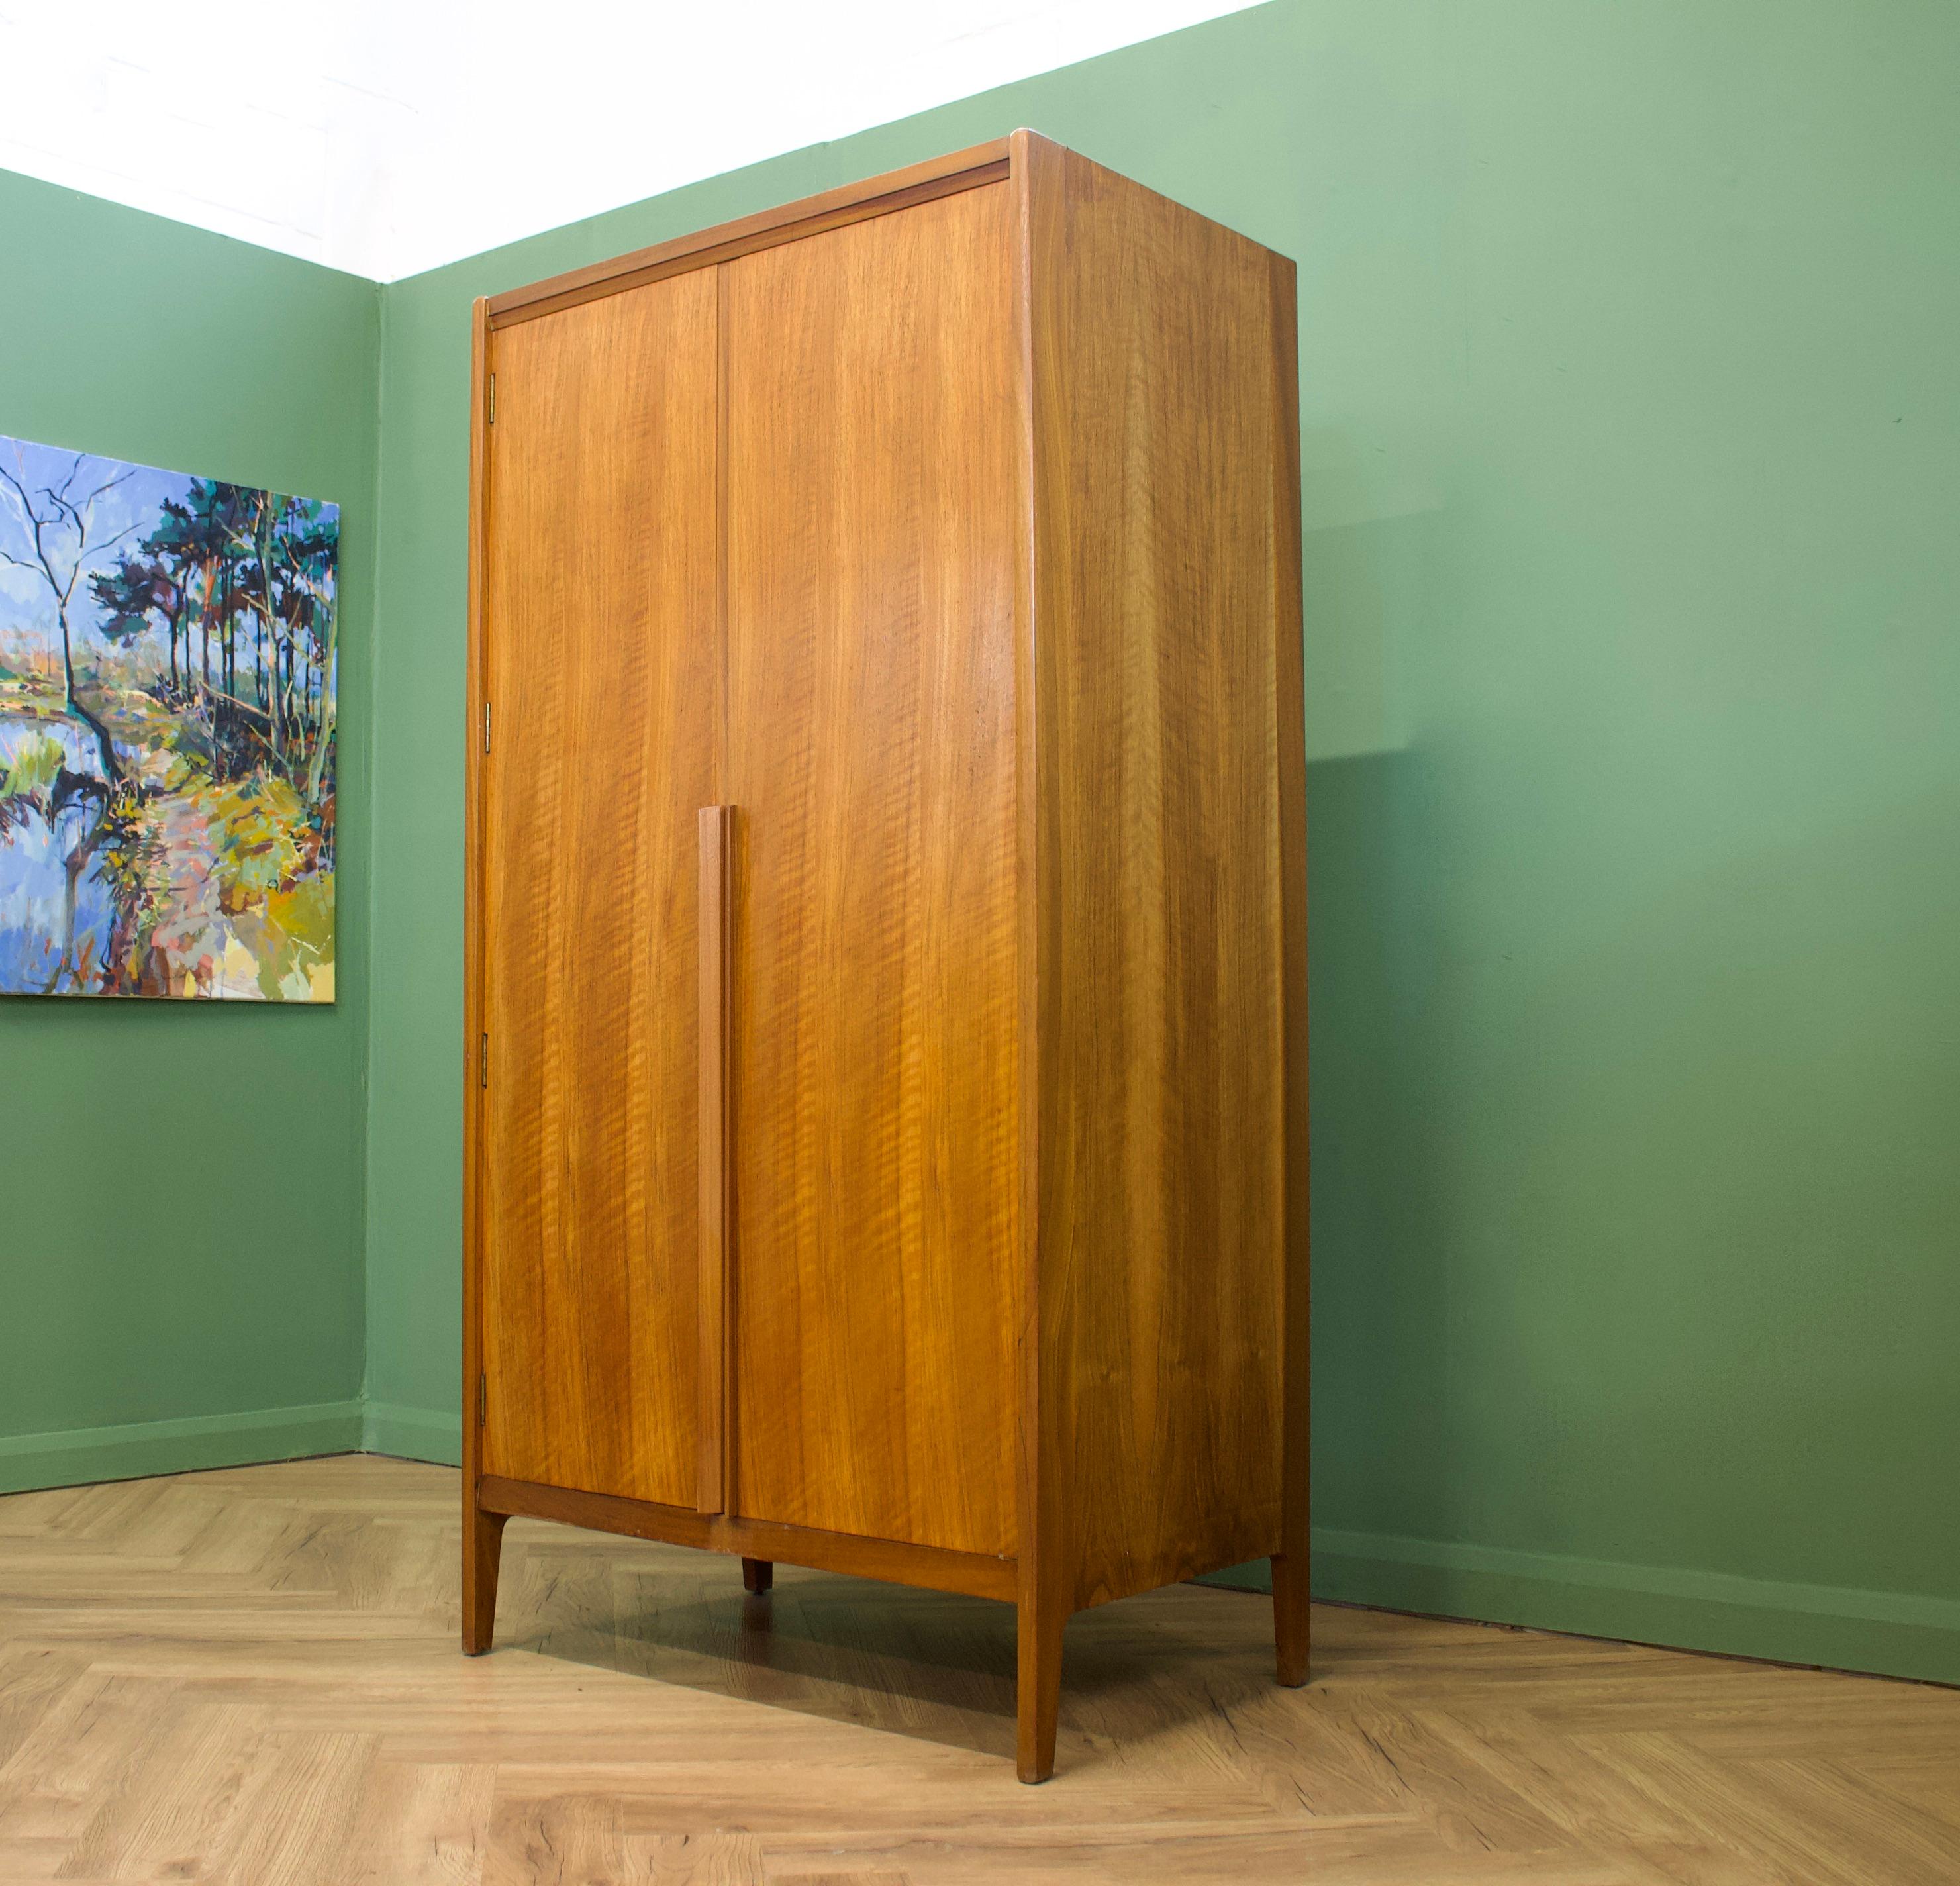 Mid-Century Modern wardrobe
Manufactured by Younger in the UK 
Made from Teak & Teak Veneer
Featuring a hanging rail and a shelves.